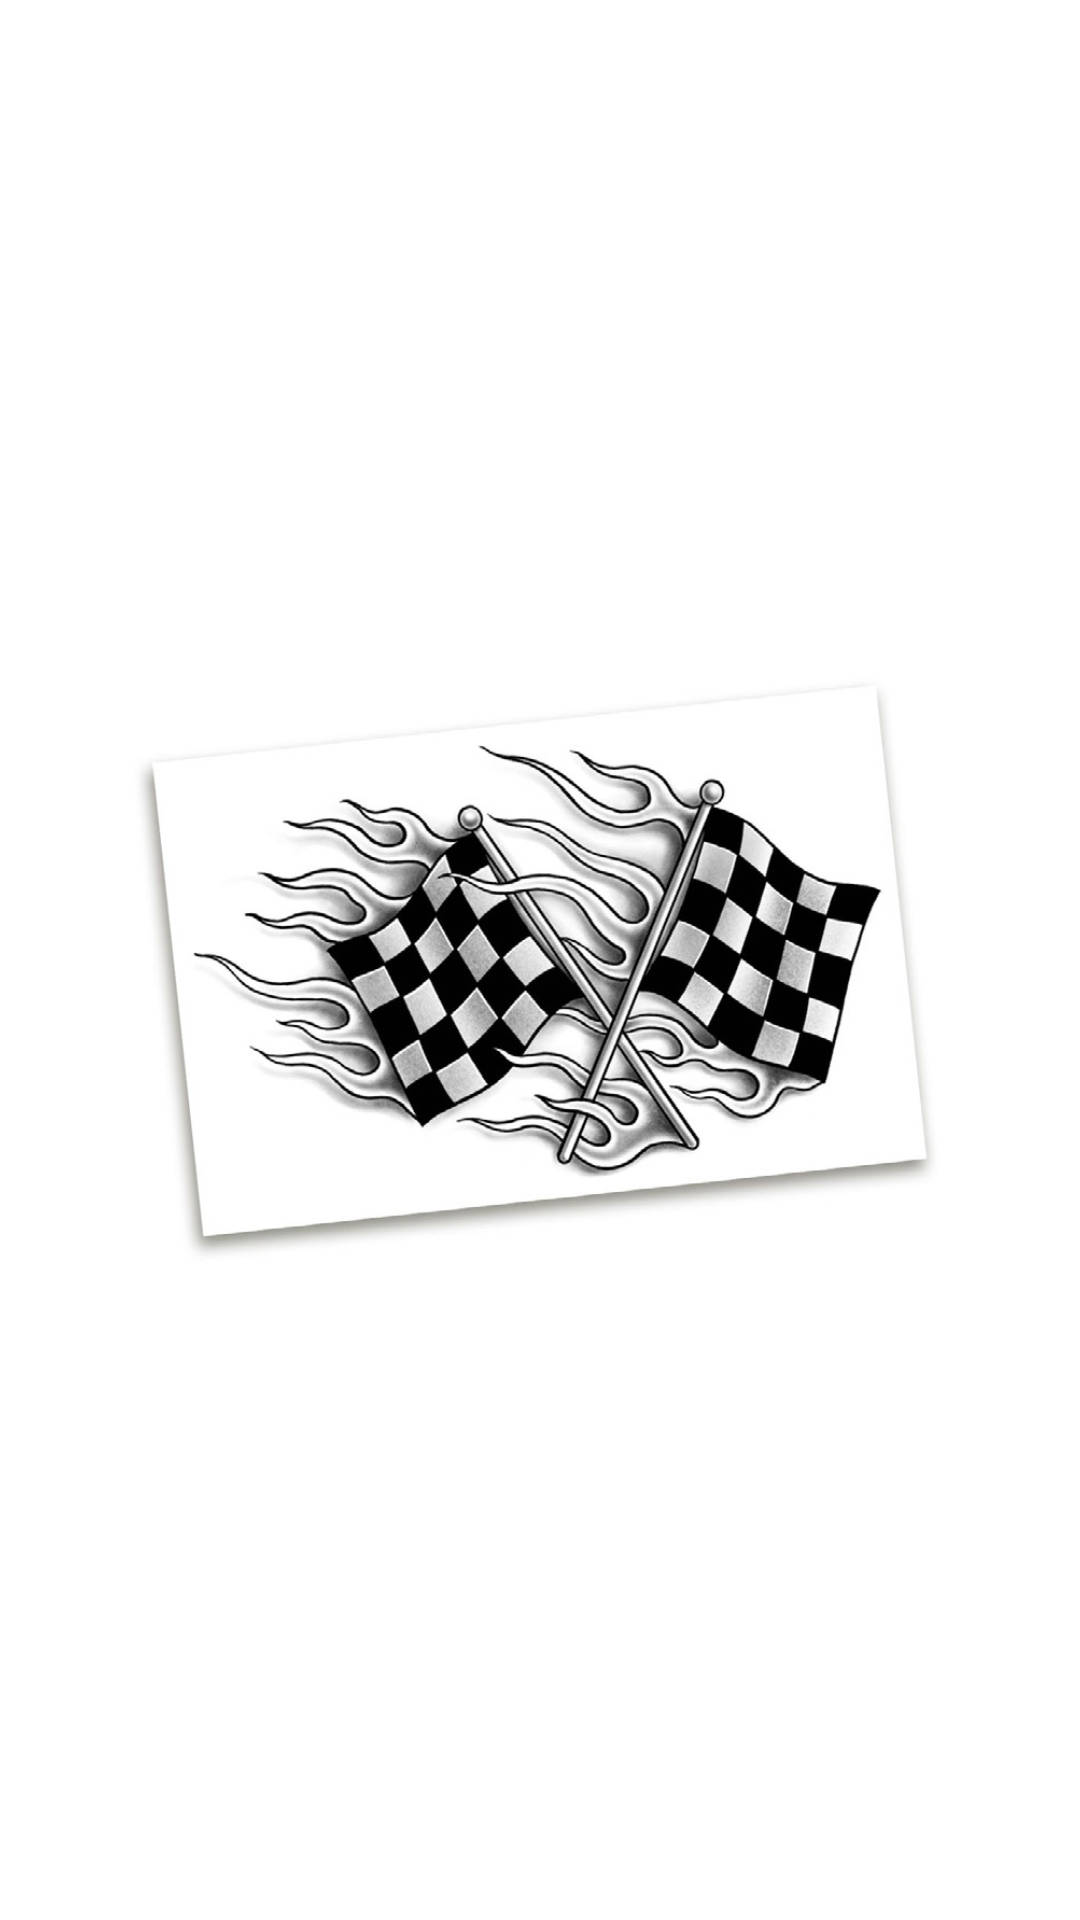 Burning Crossed Checkered Flags